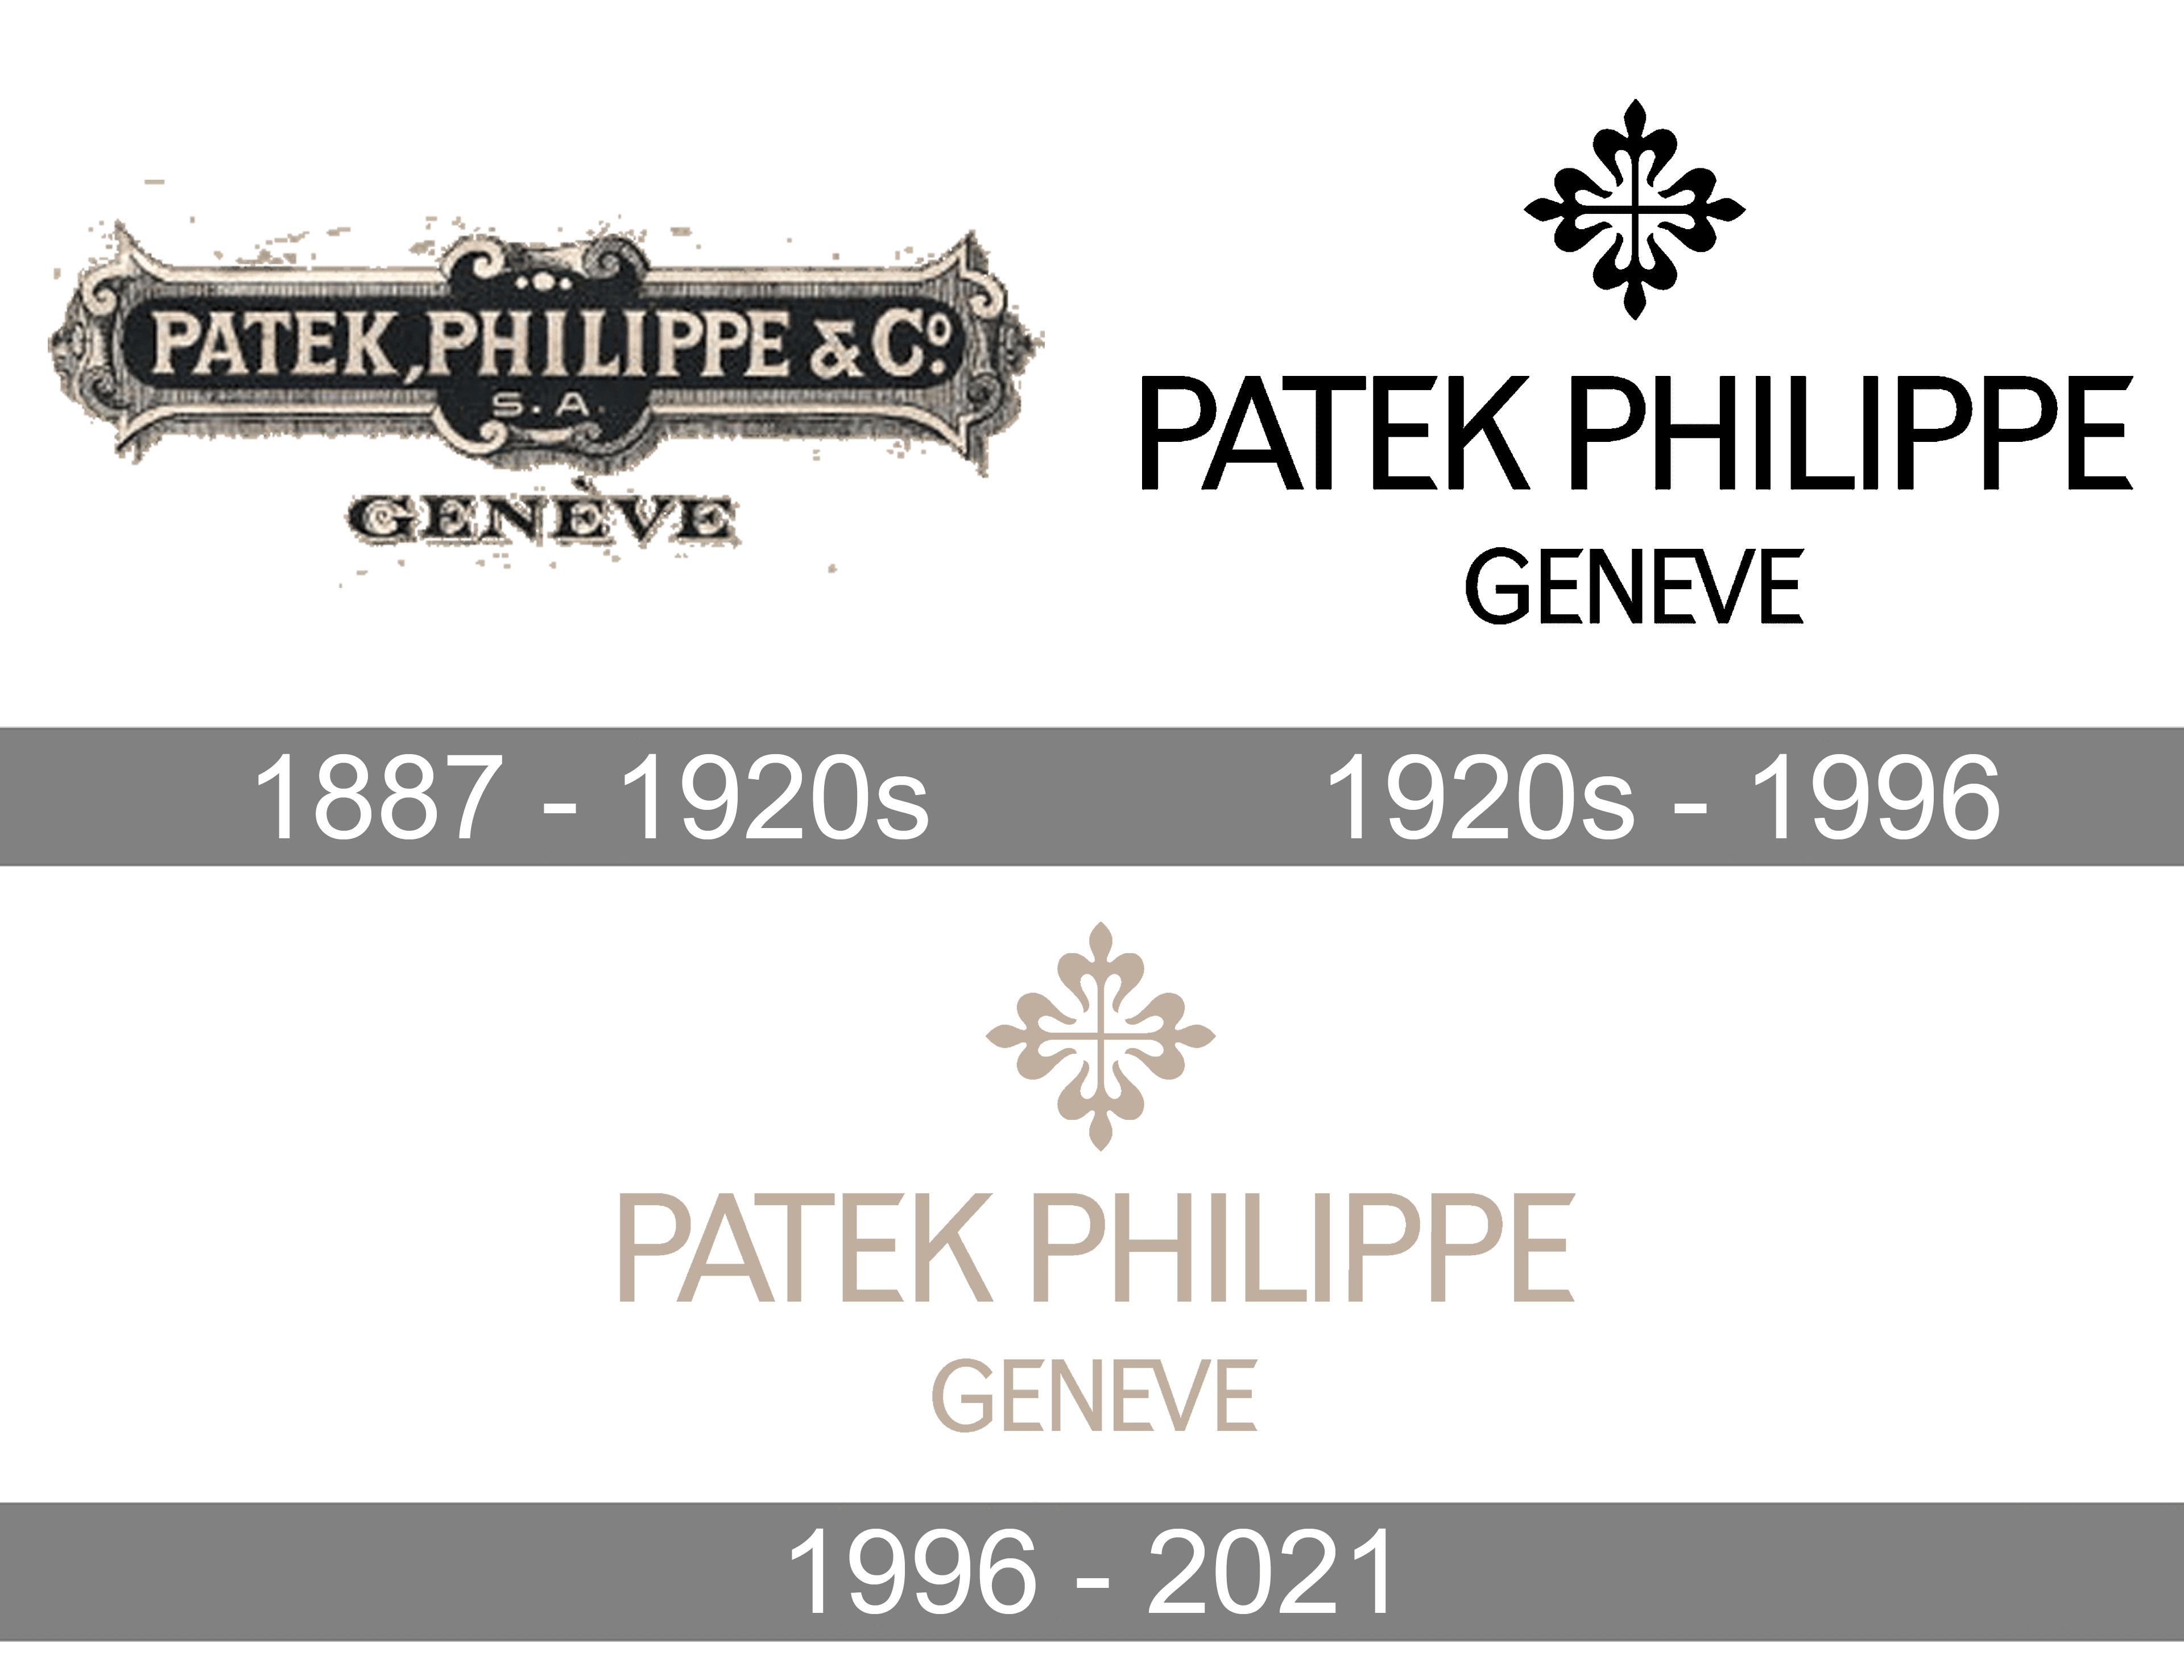 Patek Philippe Logo And Symbol, Meaning, History, PNG, Brand | vlr.eng.br